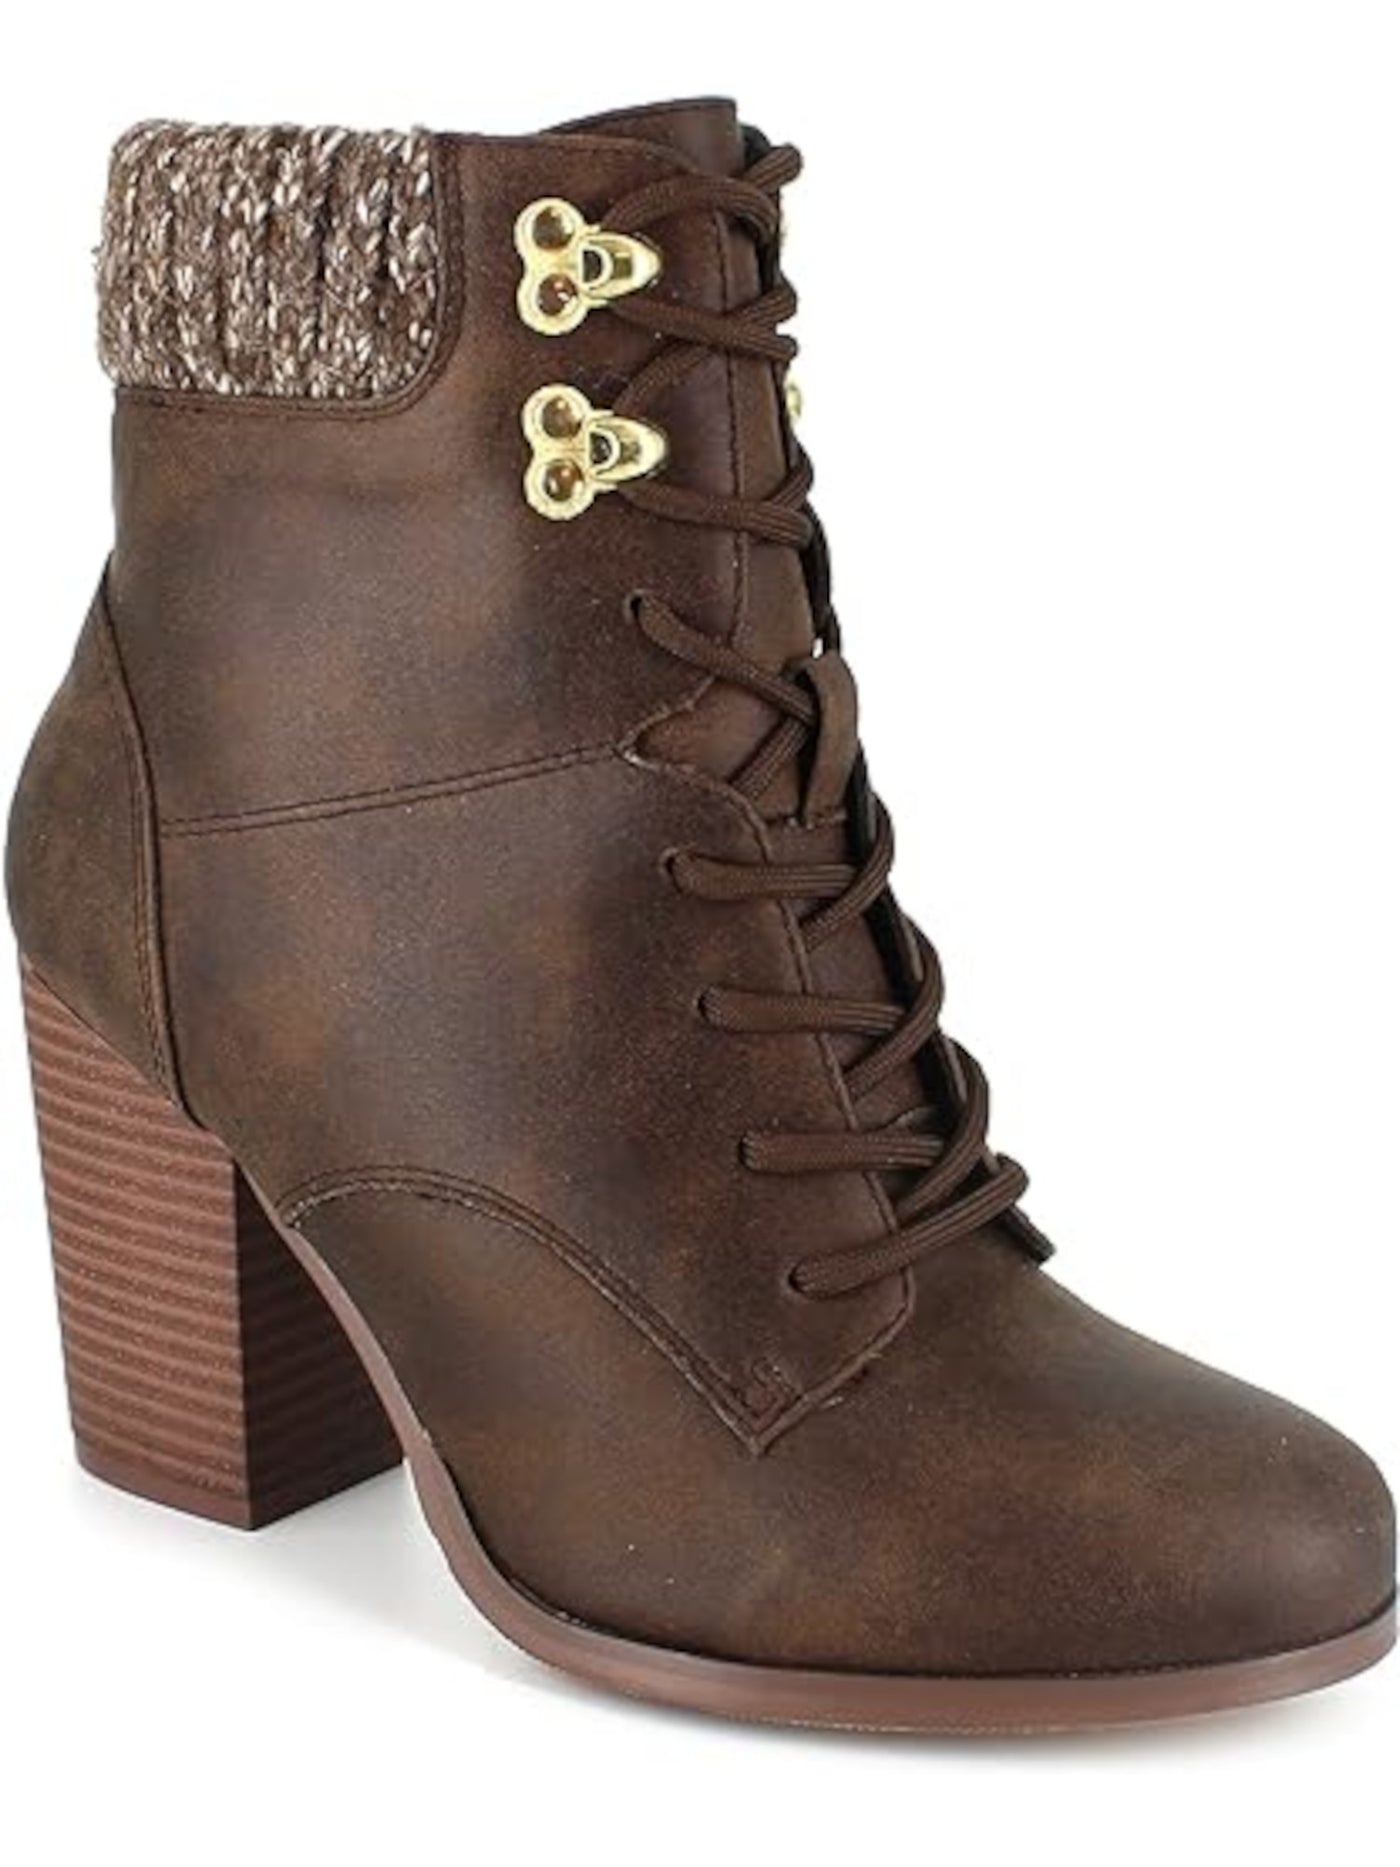 XOXO Womens Brown Zipper Magalin Round Toe Stacked Heel Lace-Up Booties 9 M